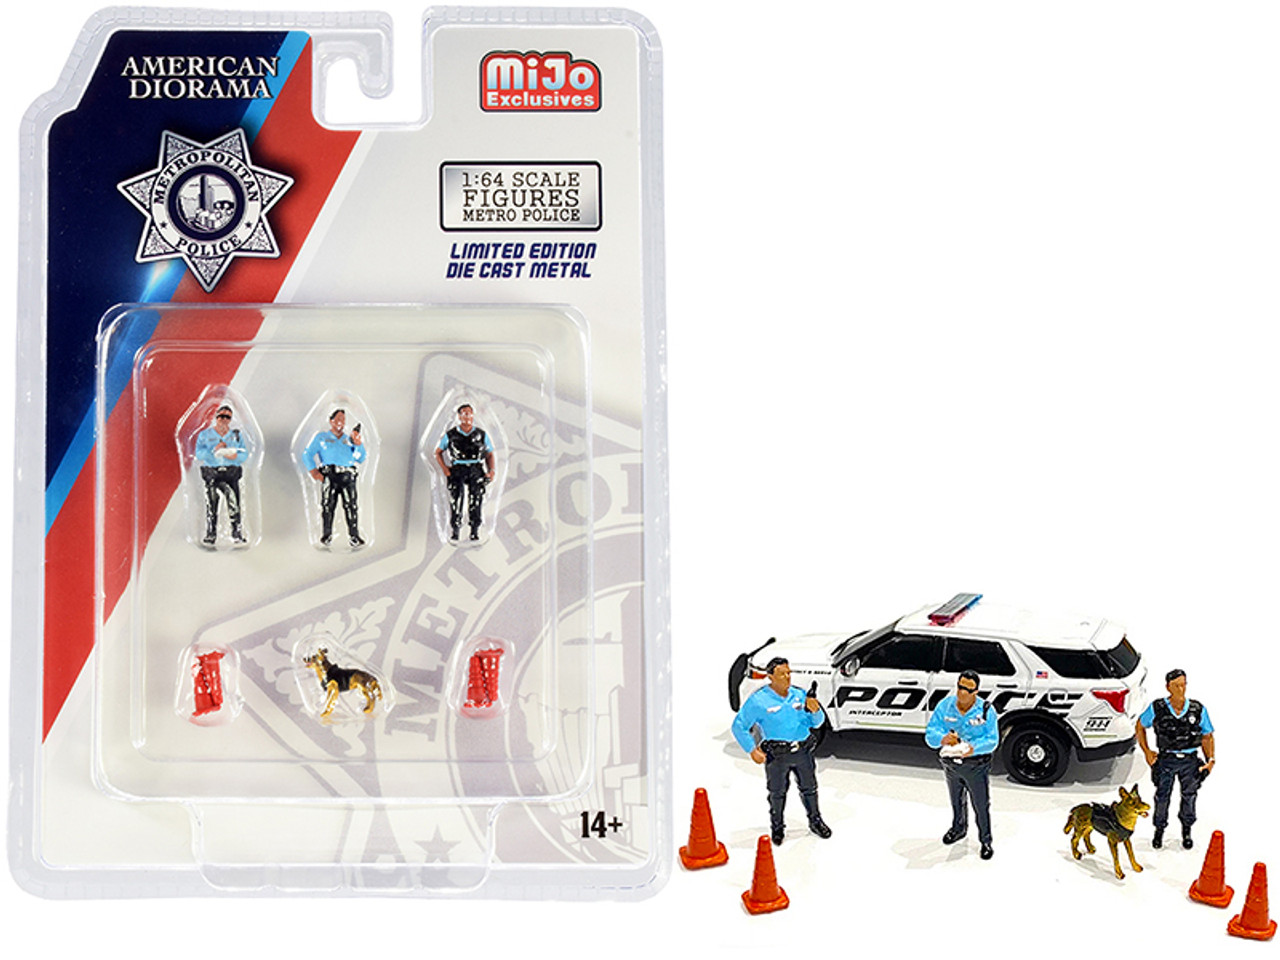 "Metropolitan Police" 8 piece Diecast Set (3 Figurines and 1 Dog and 4 Accessories) for 1/64 Scale Models by American Diorama